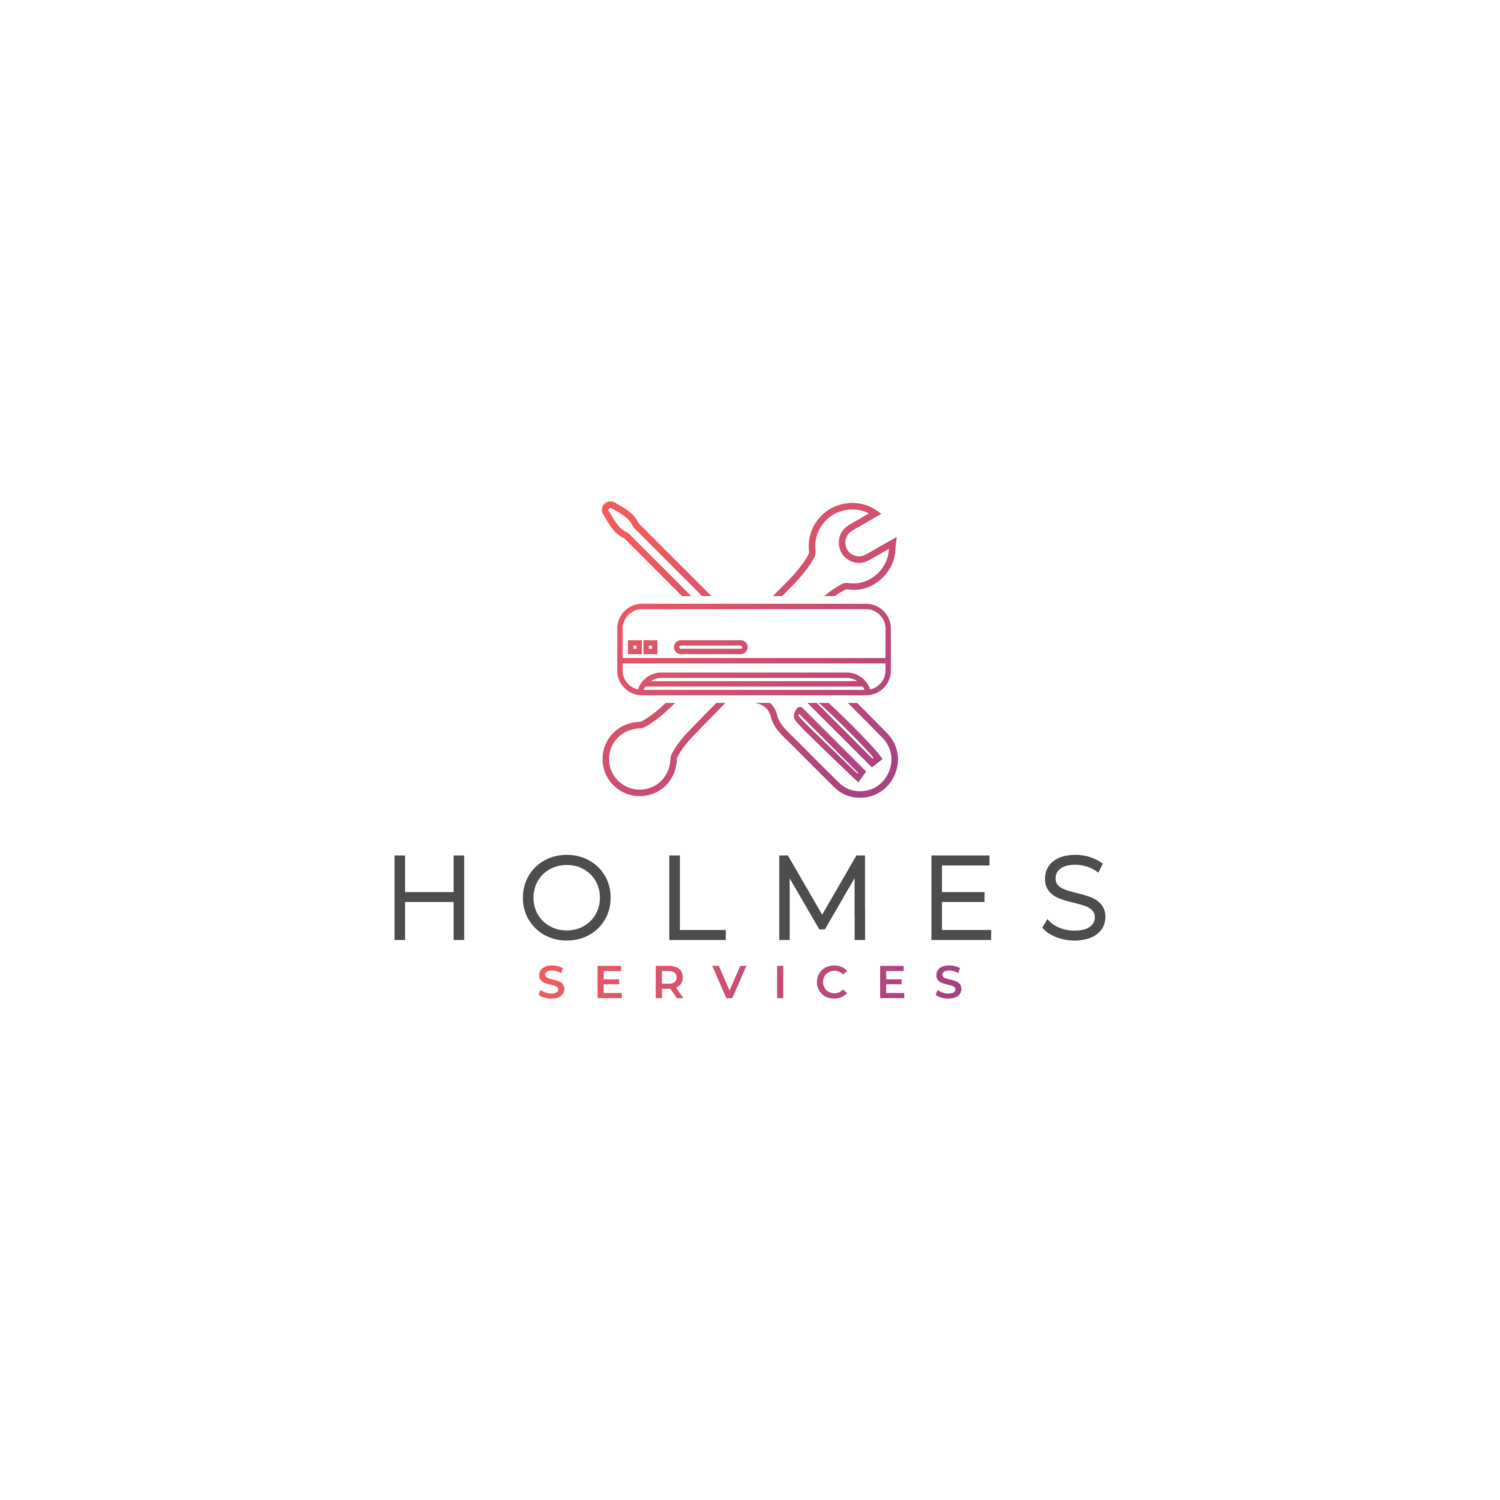 Holmes Services